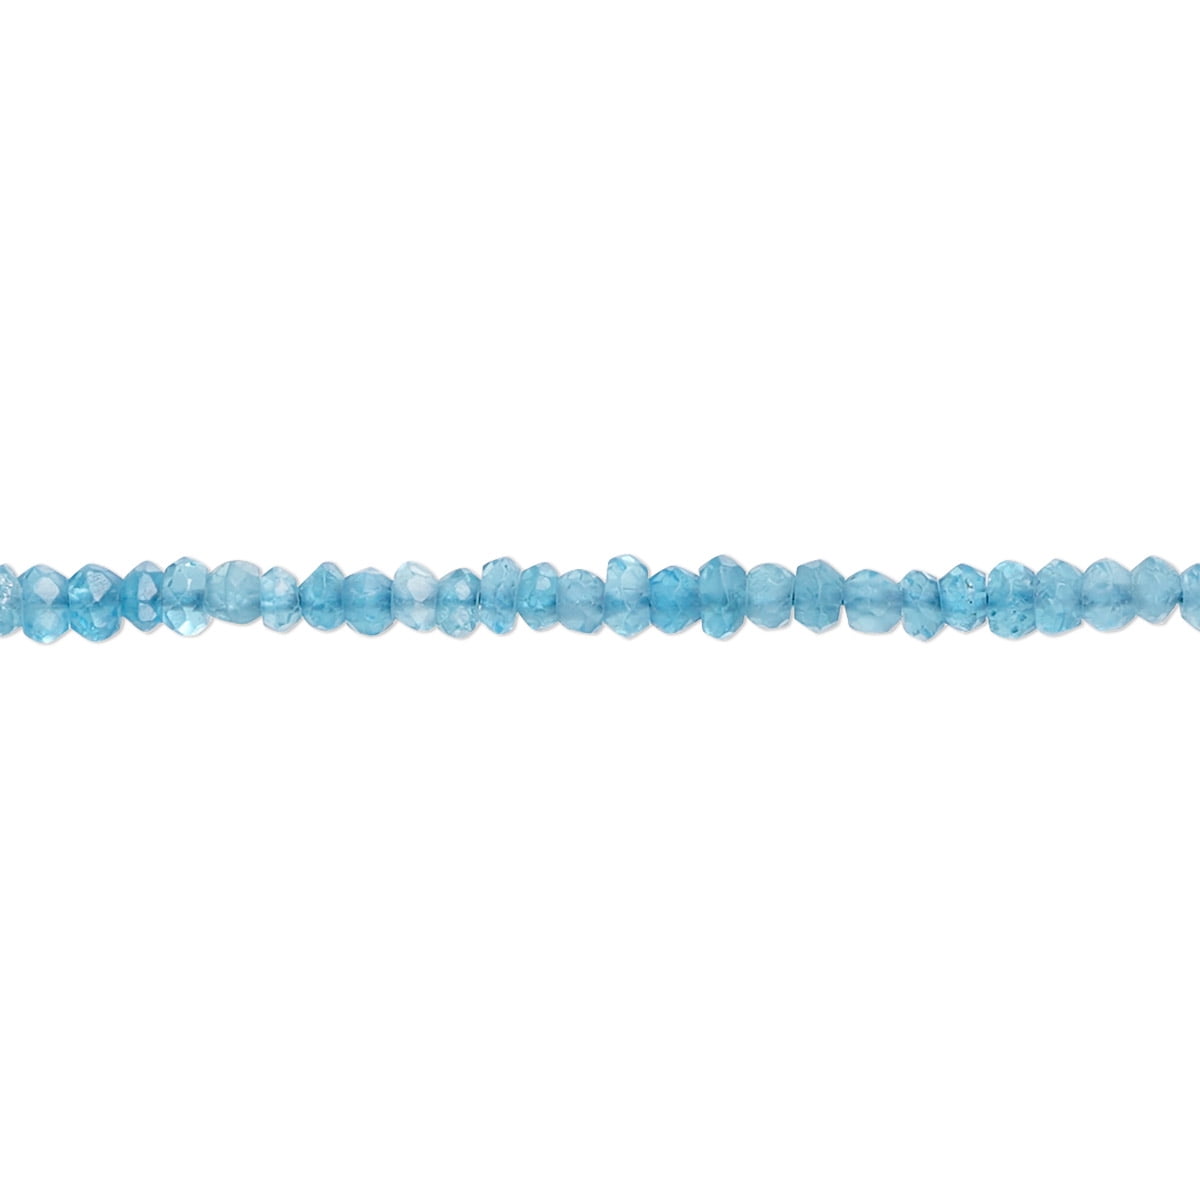 Beautiful Natural Blue Neon Apatite Gemstone 3 MM Rondelle Faceted Drilled Beads 